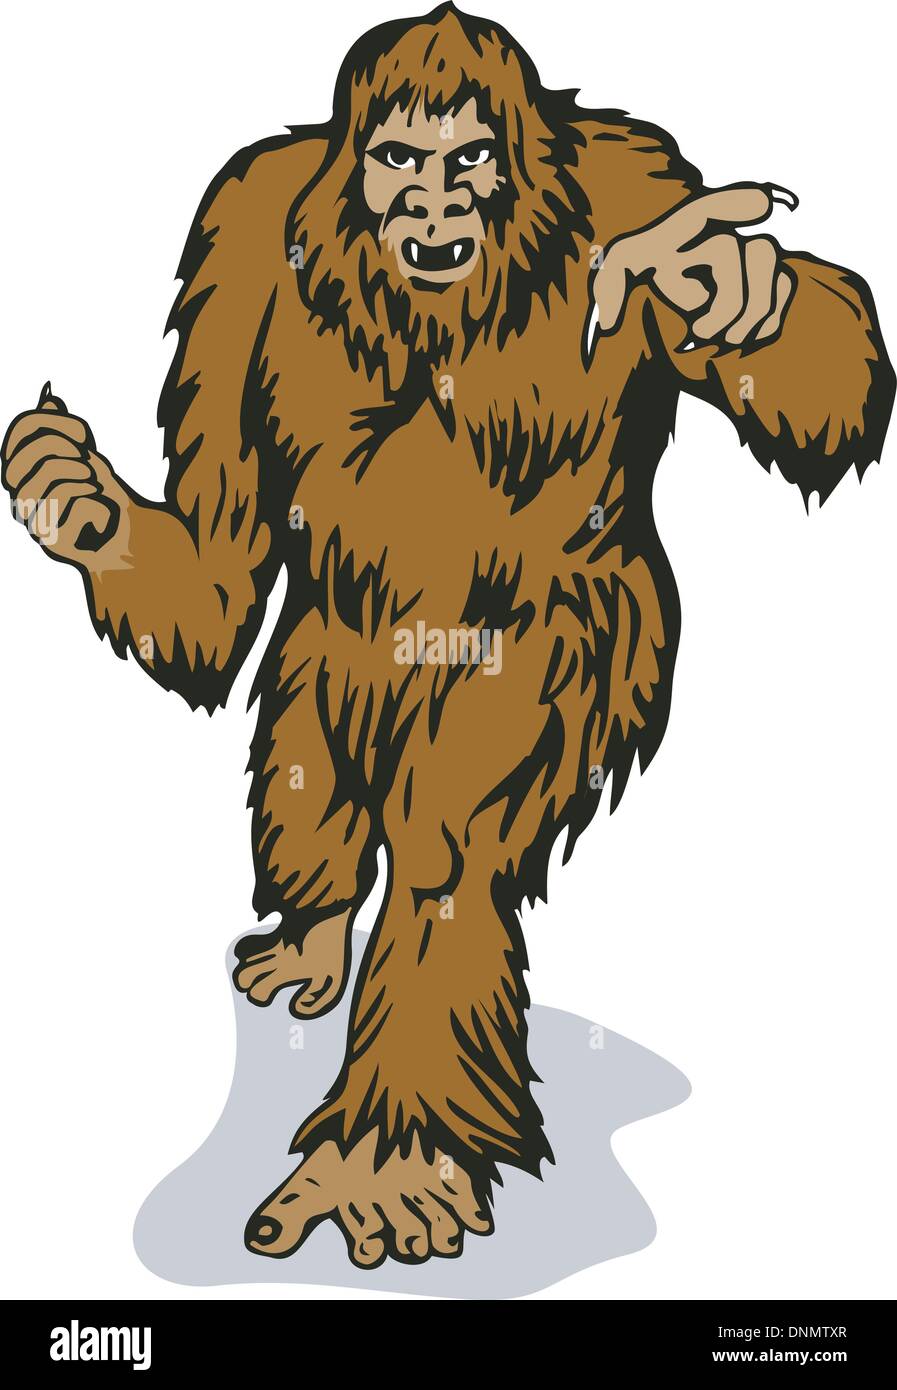 Illustration of big foot pointing, done in retro style. Stock Vector